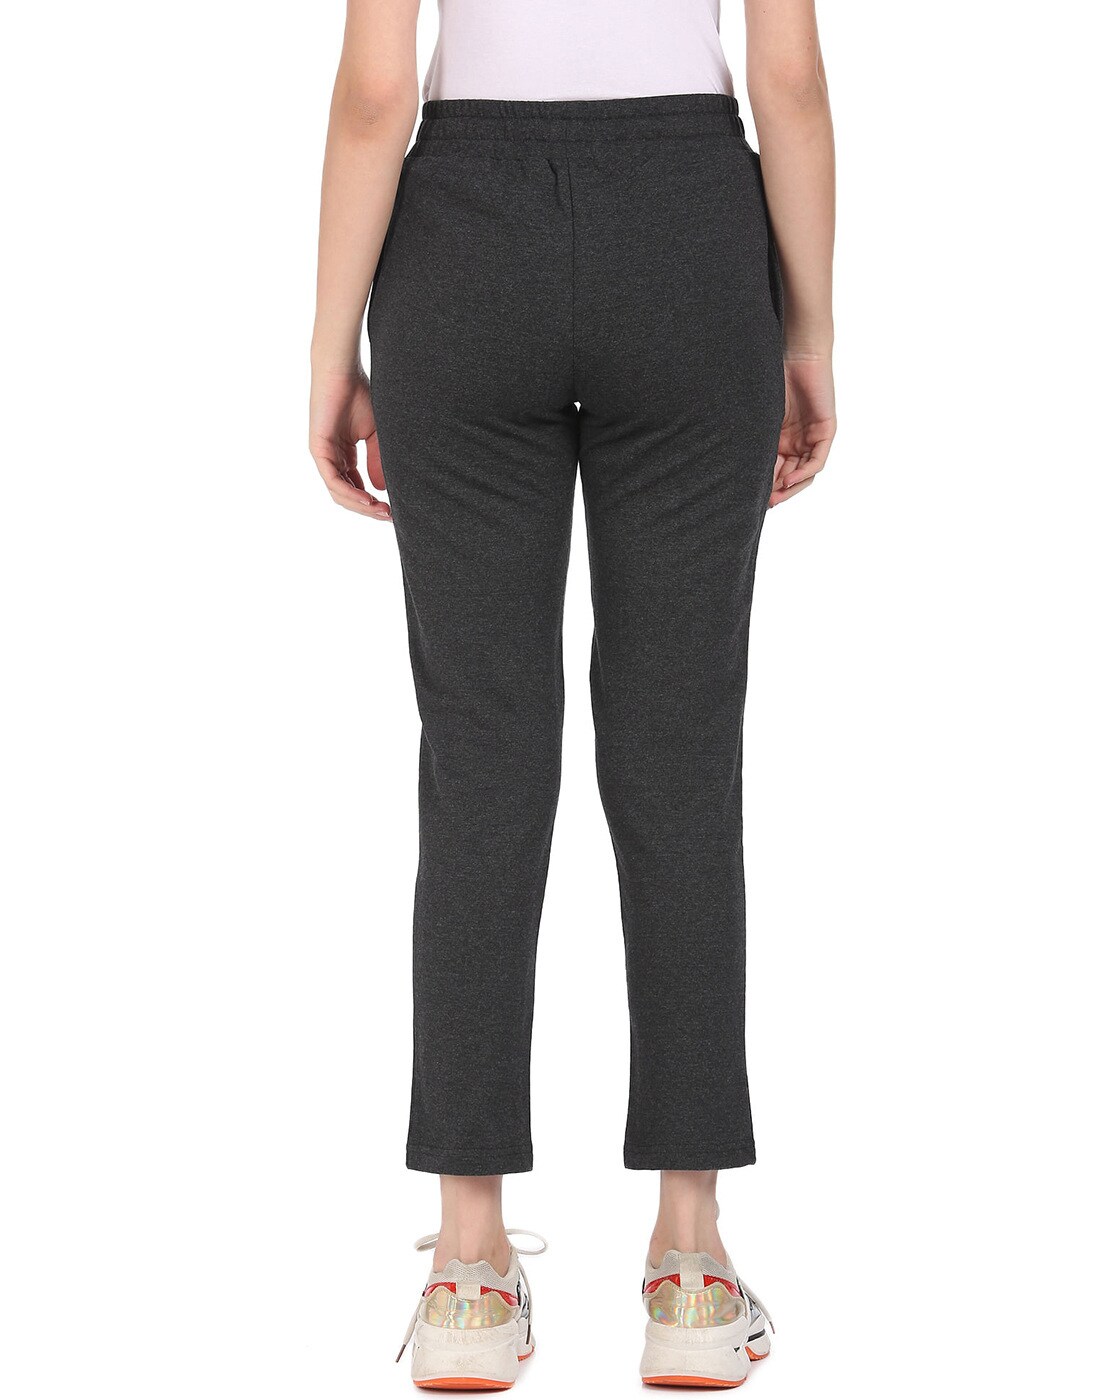 Women's Super Combed Cotton Rich Relaxed Fit Trackpants With Contrast Side  Piping and Pockets - Charcoal Melange